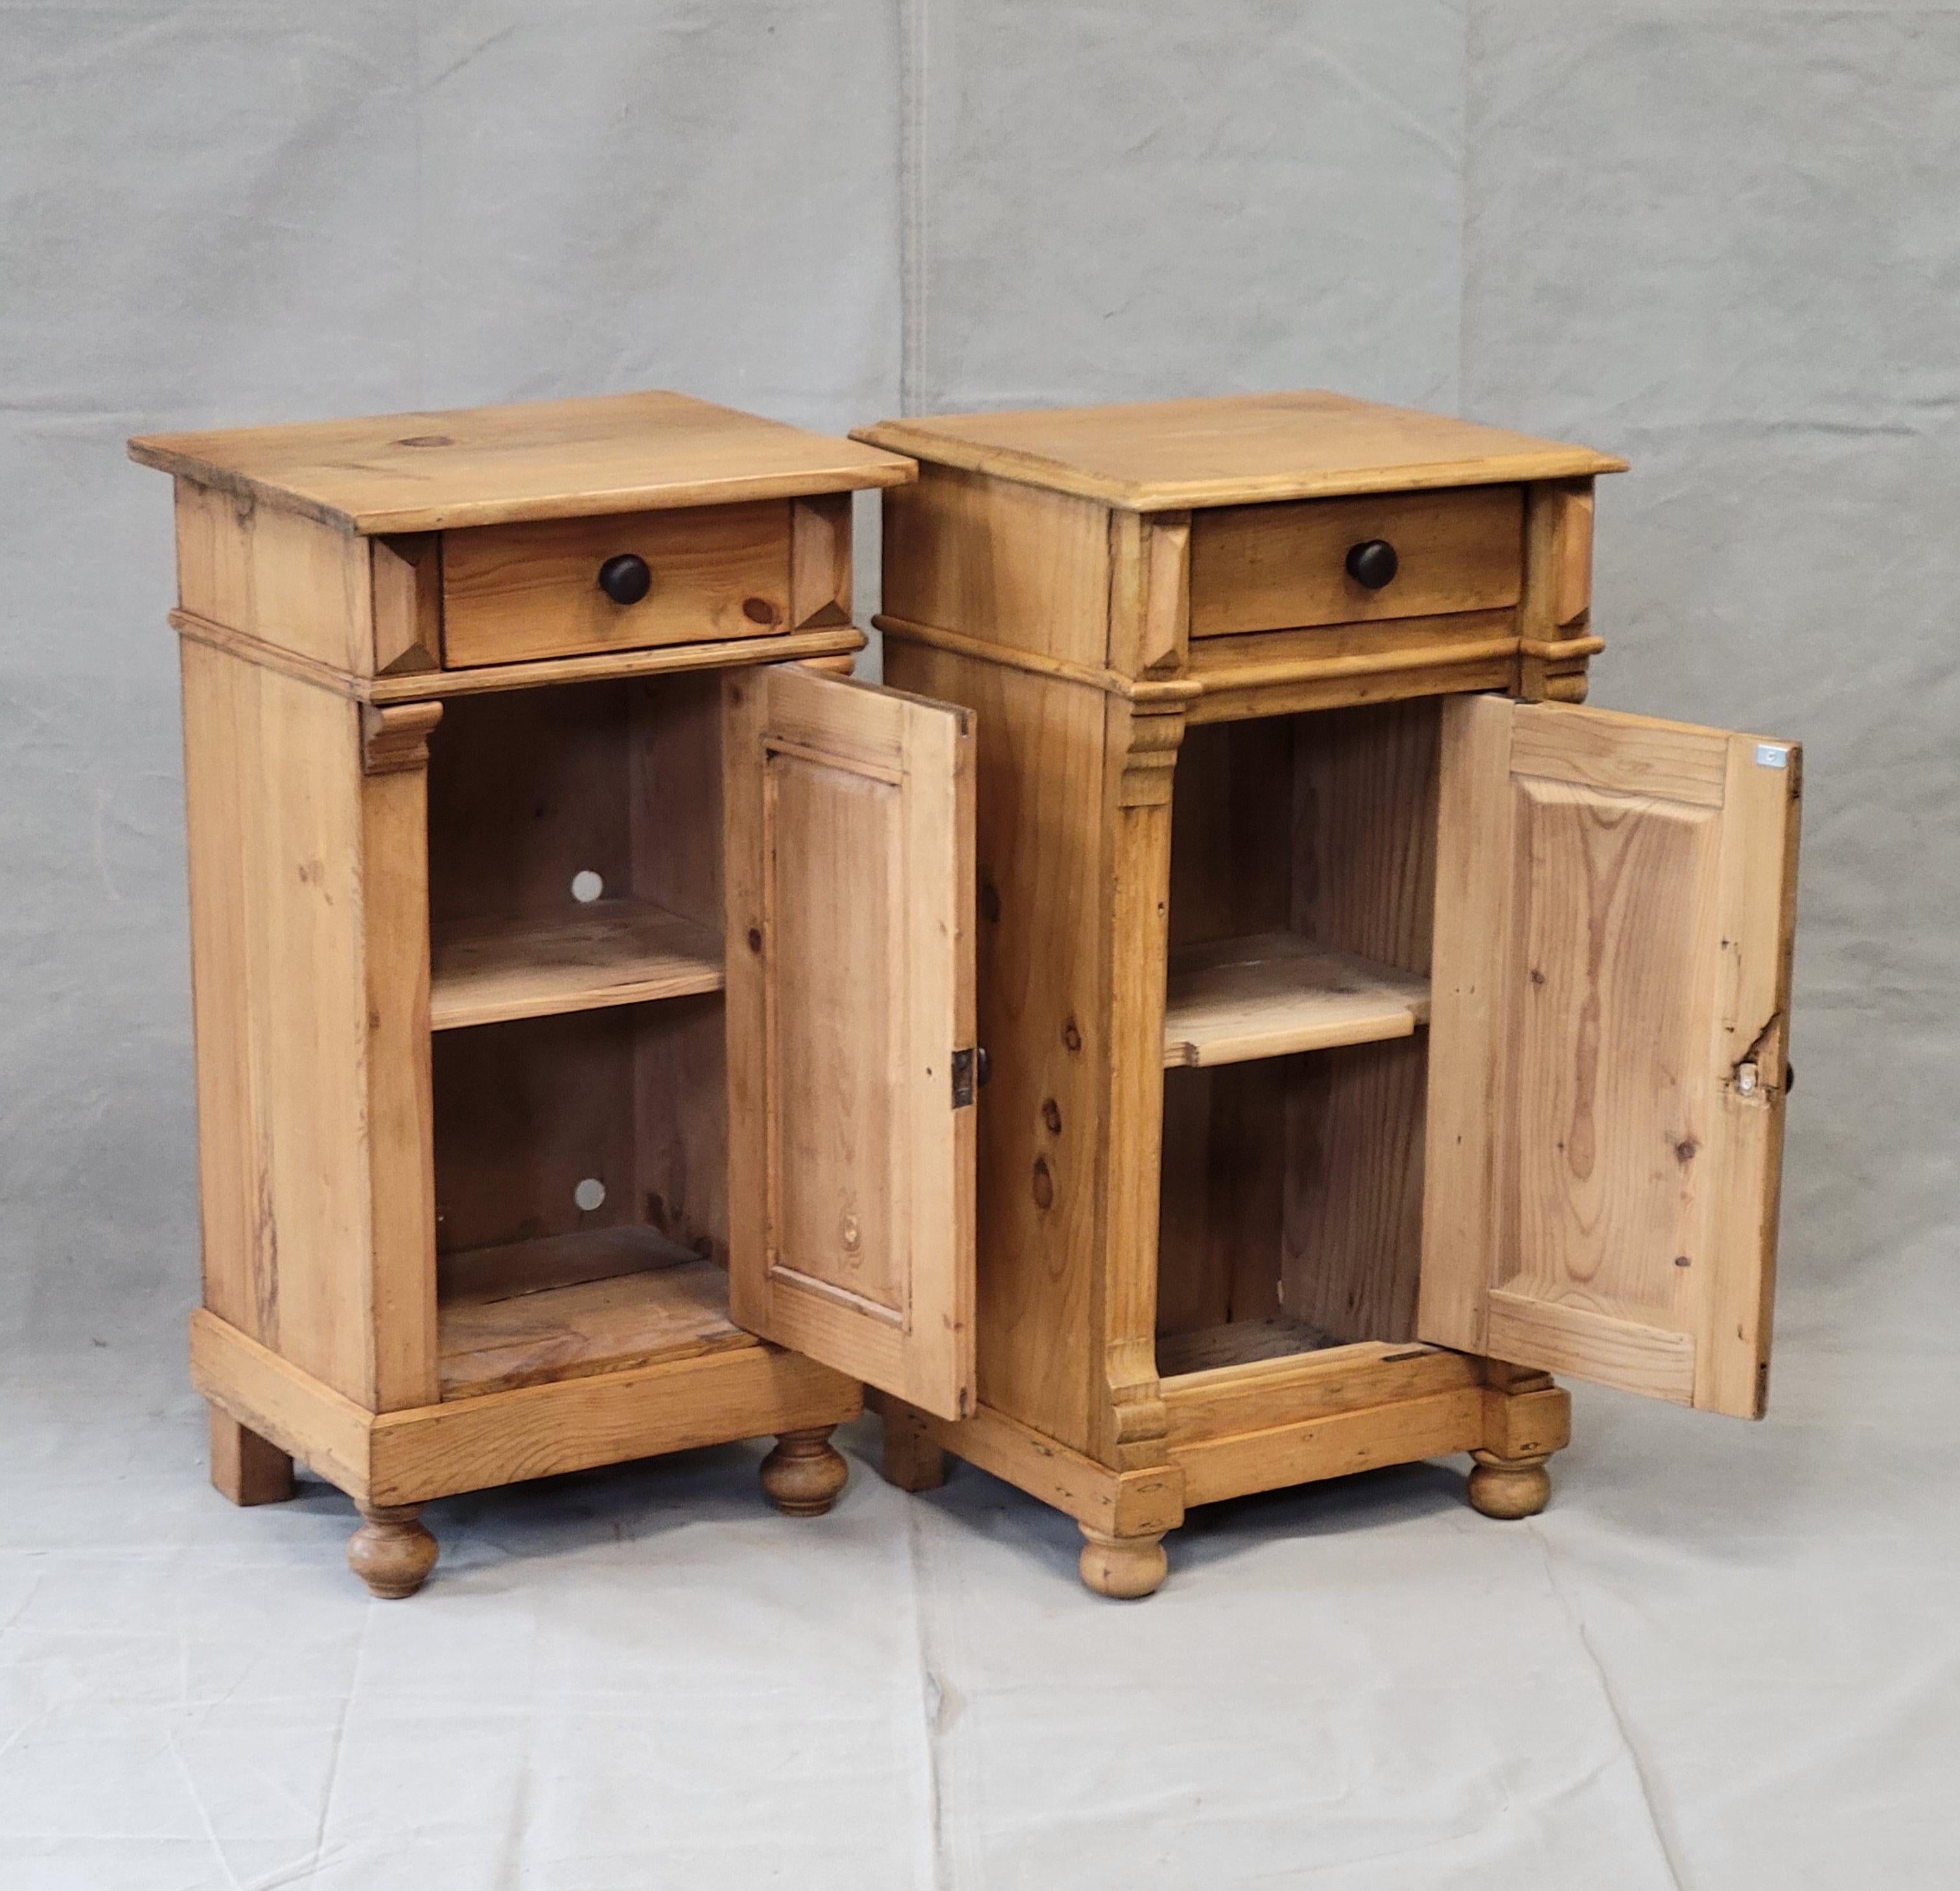 Edwardian Antique Eastern European Pine Nightstands - a Near Pair For Sale